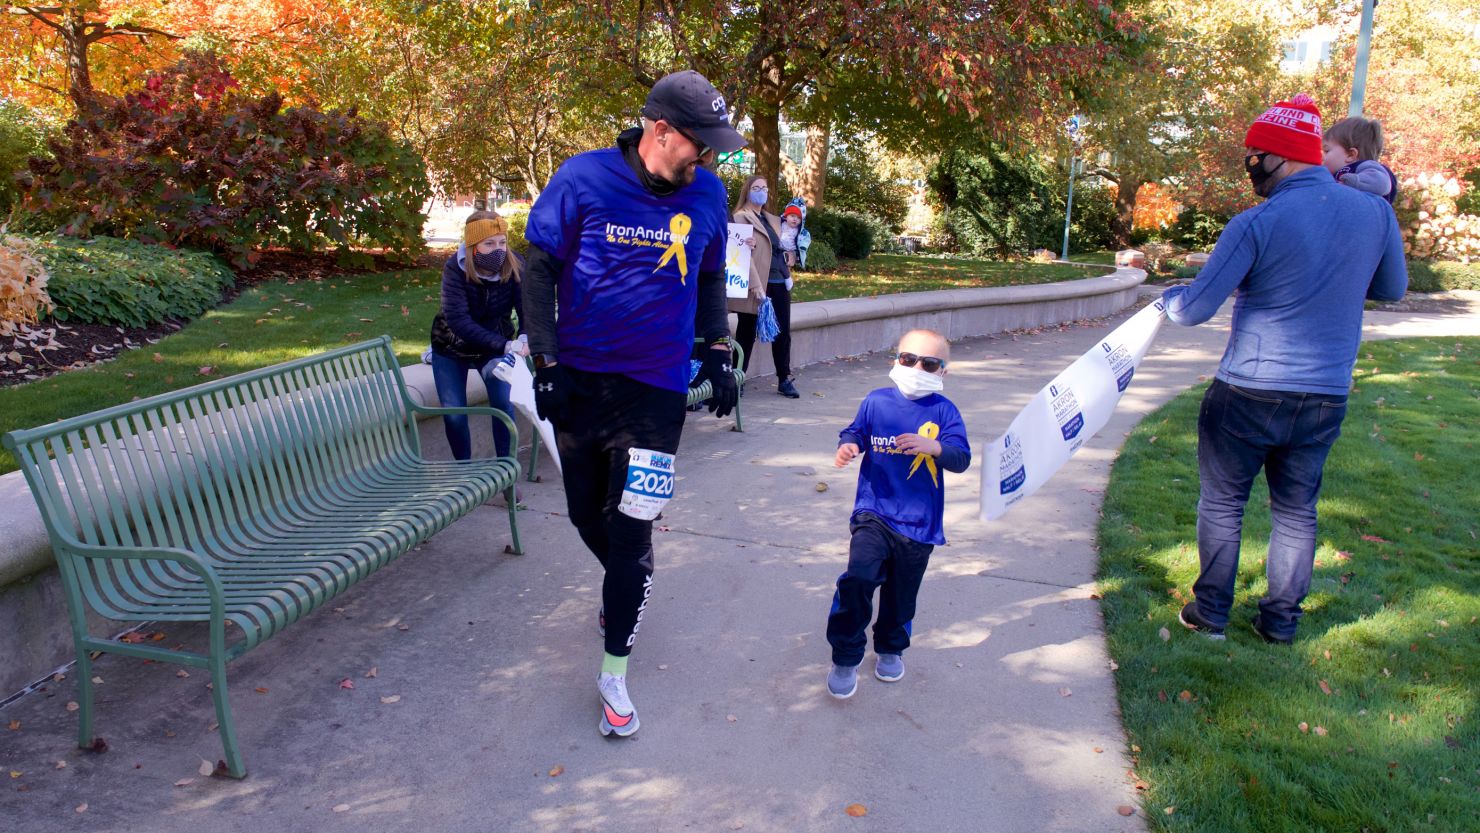 An Ohio dad ran his first marathon to support his son fighting cancer and raise money for Akron Children's Hospital. 